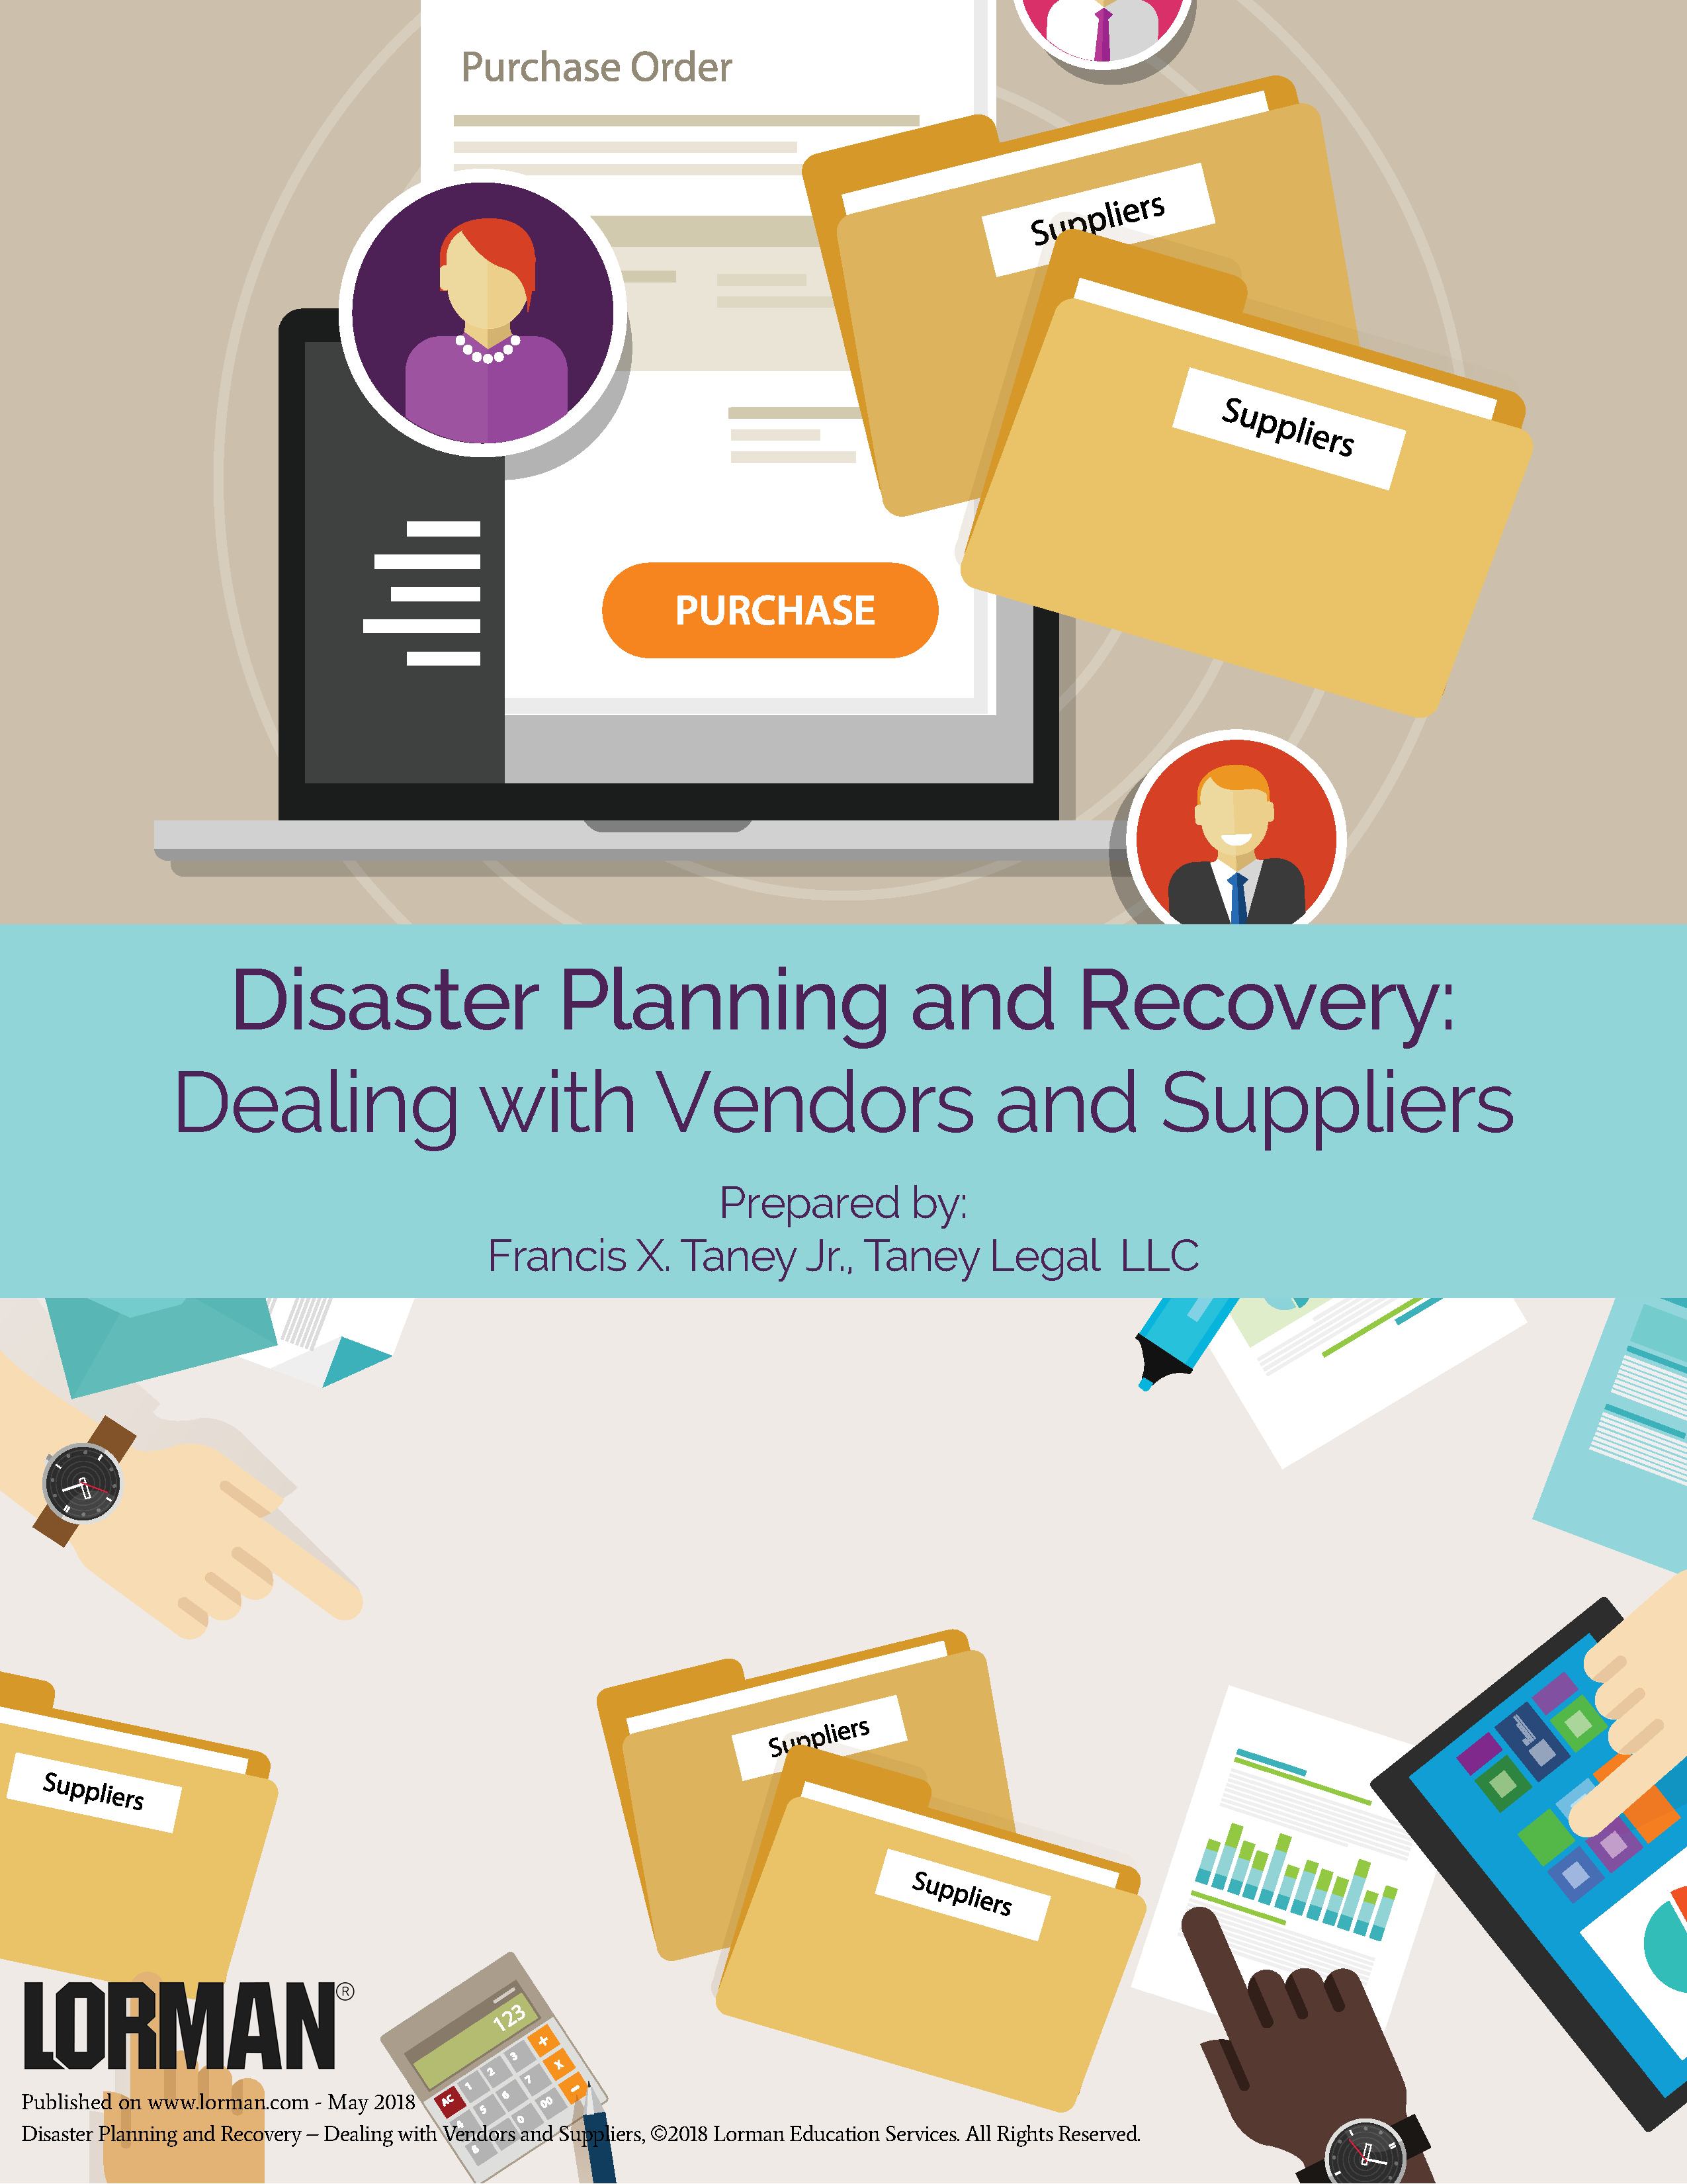 Disaster Planning and Recovery: Dealing with Vendors and Suppliers